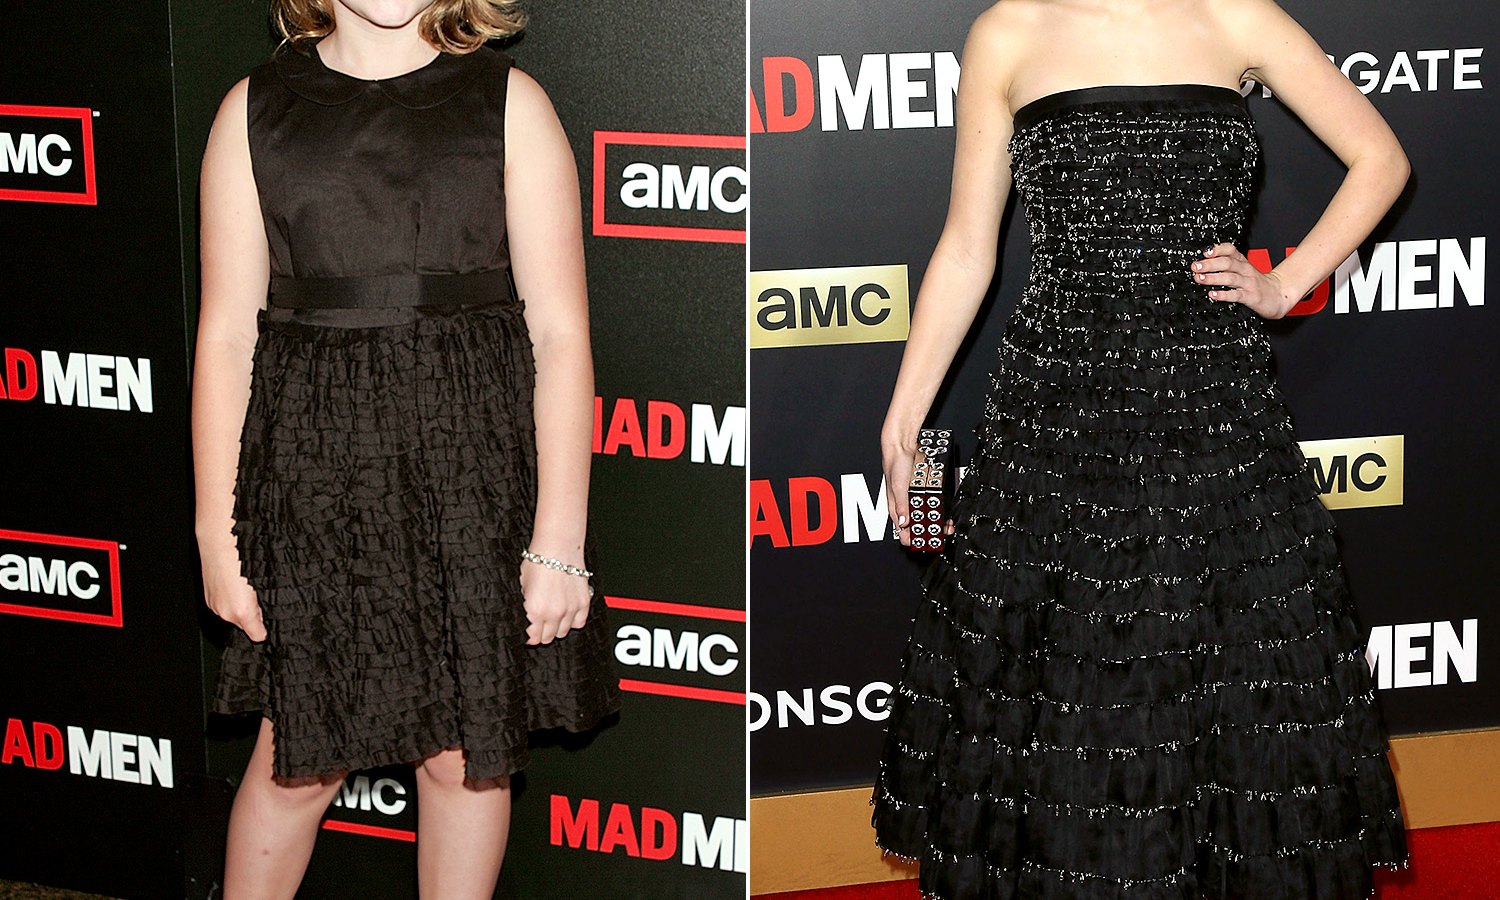 Kiernan Shipka at the Mad Men premiere in 2009 and 2015.